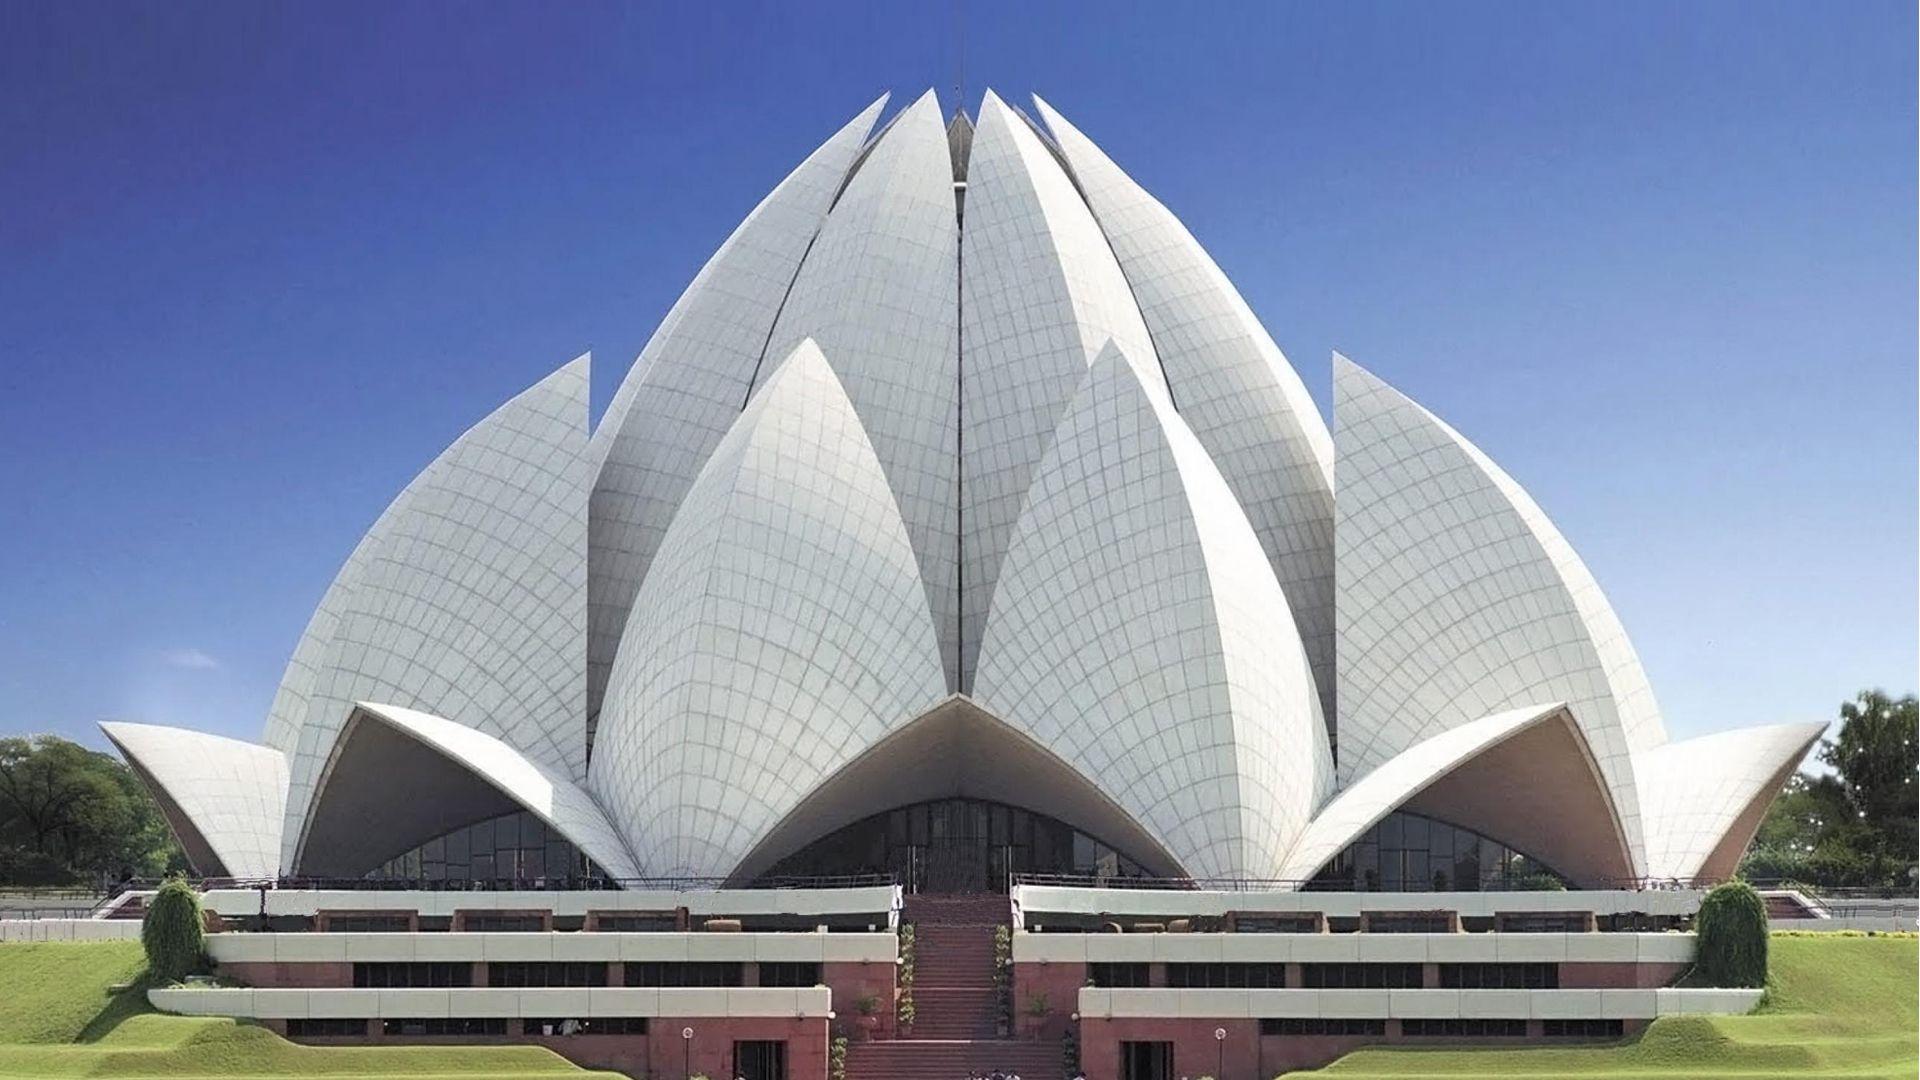 High Quality Picture of Lotus Temple India for Desktop Wallpaper